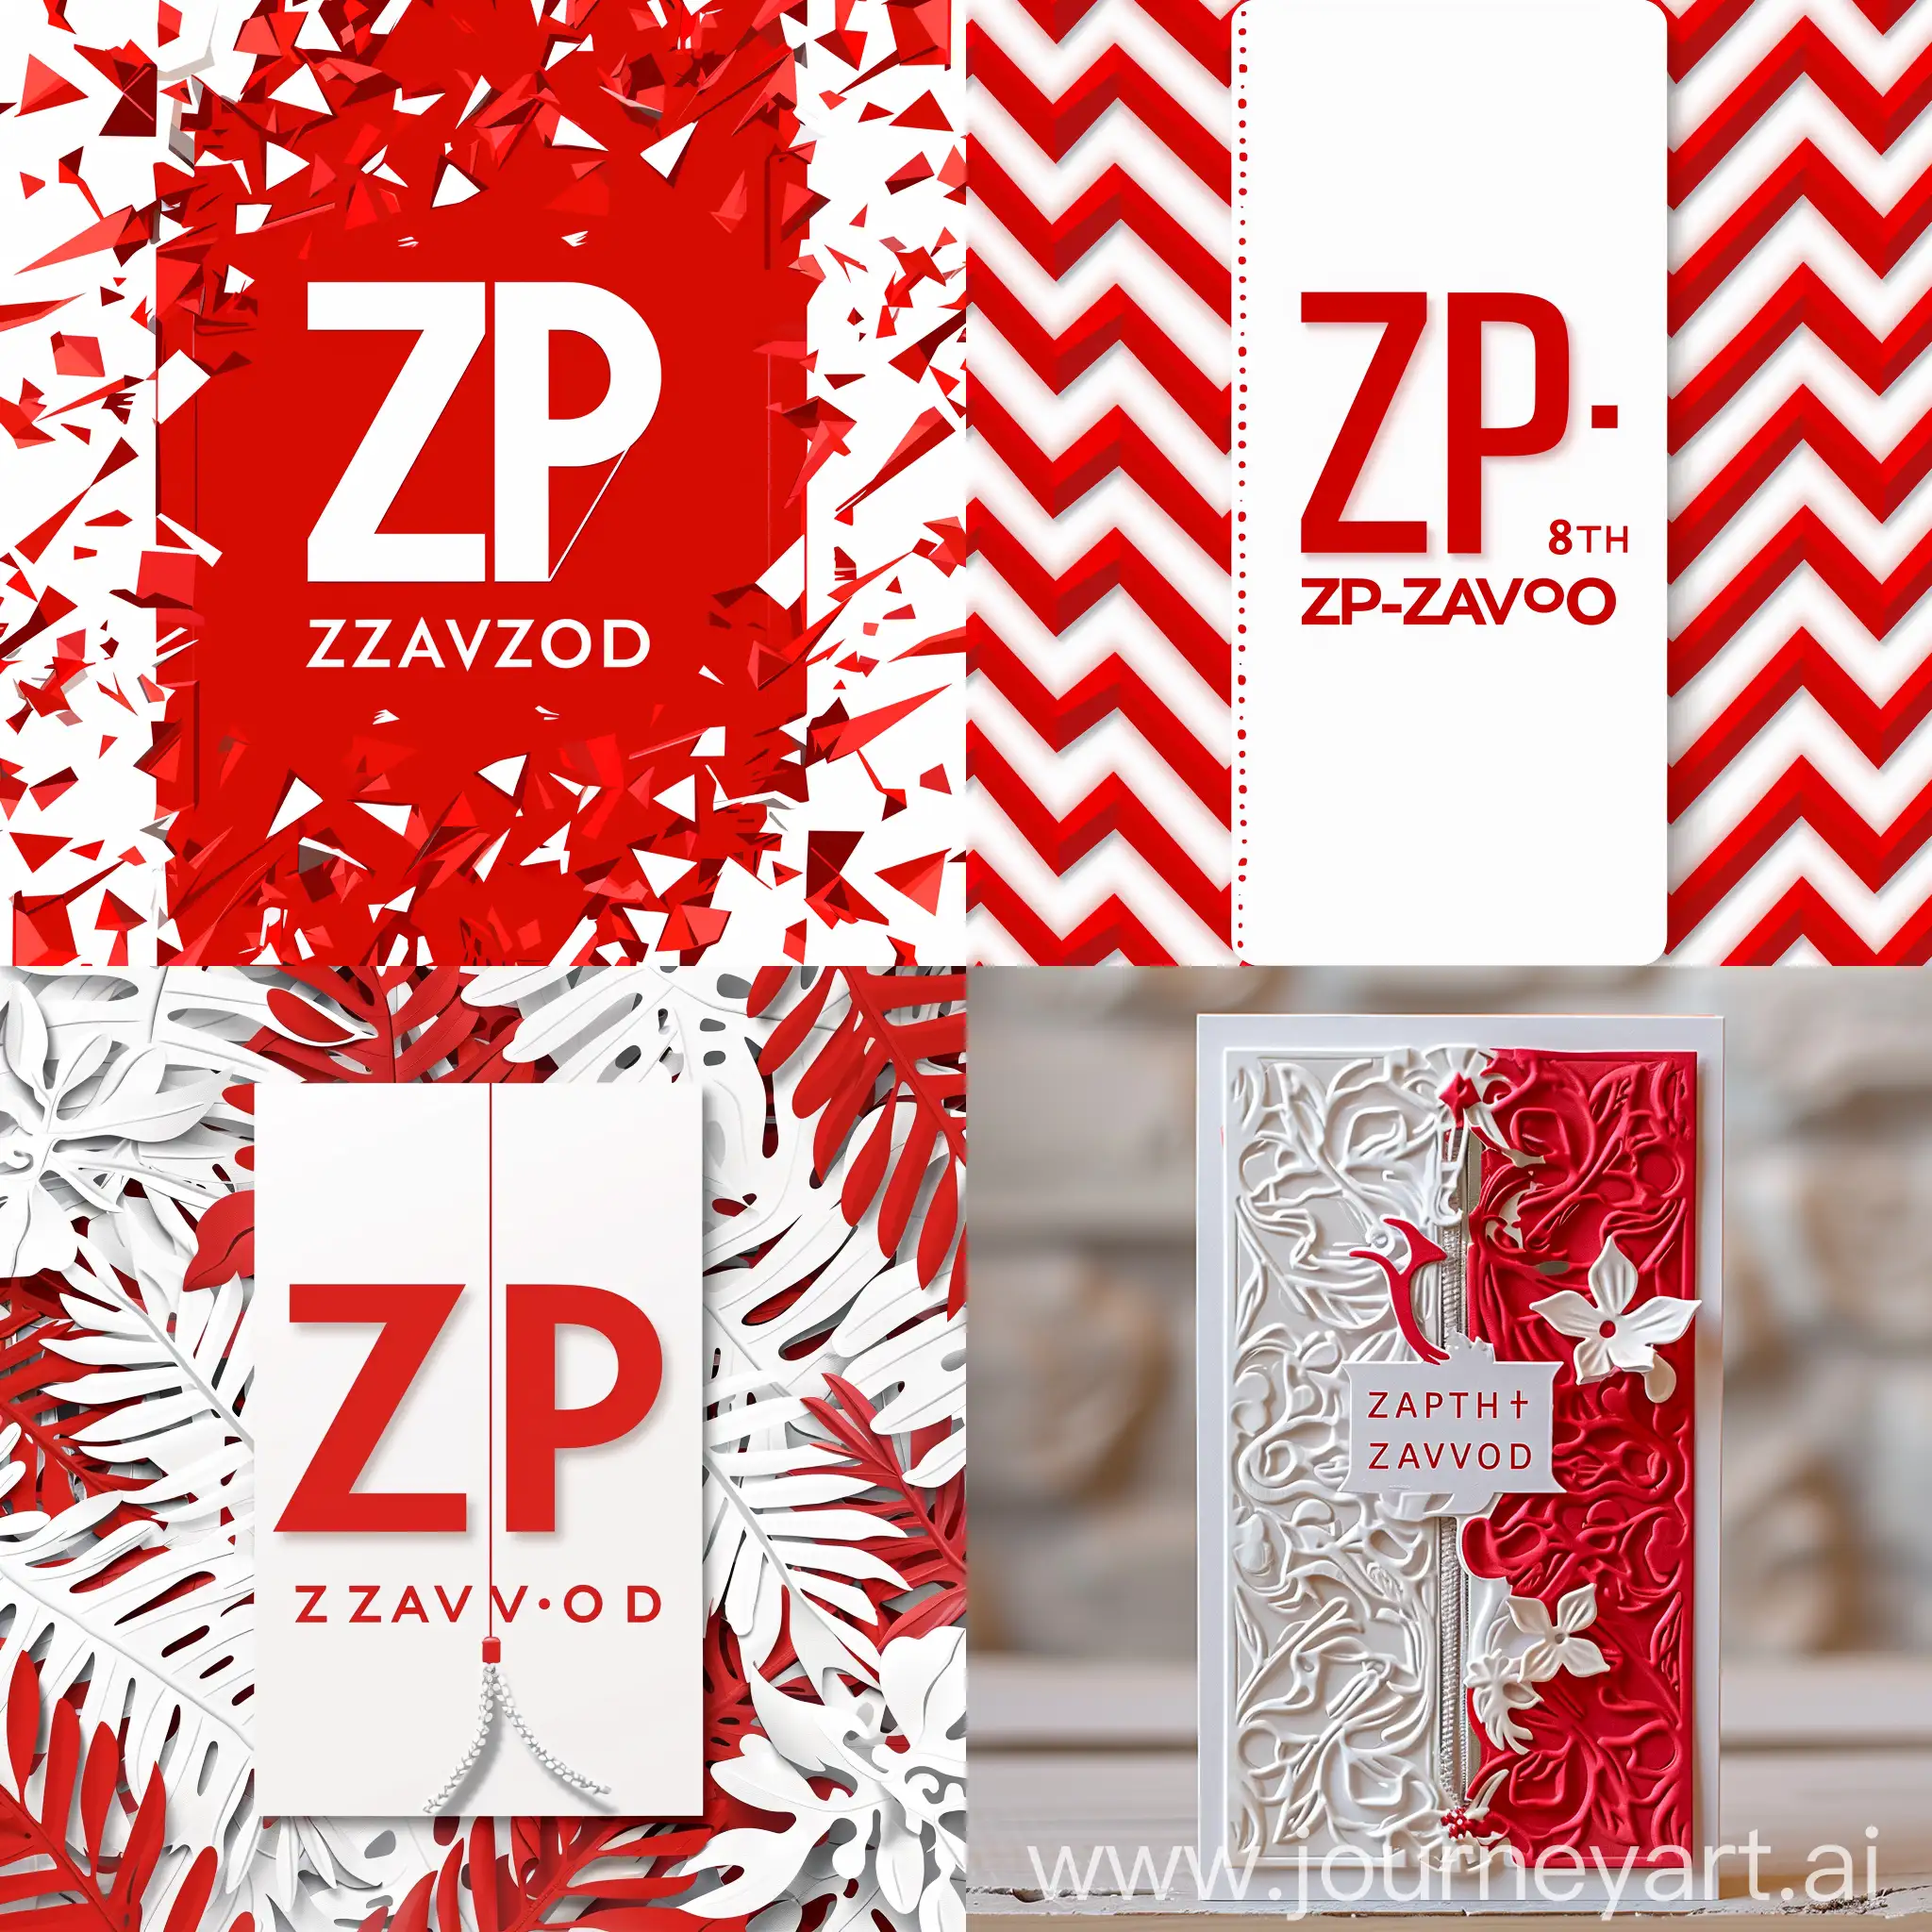 Celebrating-March-8th-with-Red-and-White-Tones-Partners-of-ZIP-ZAVOD